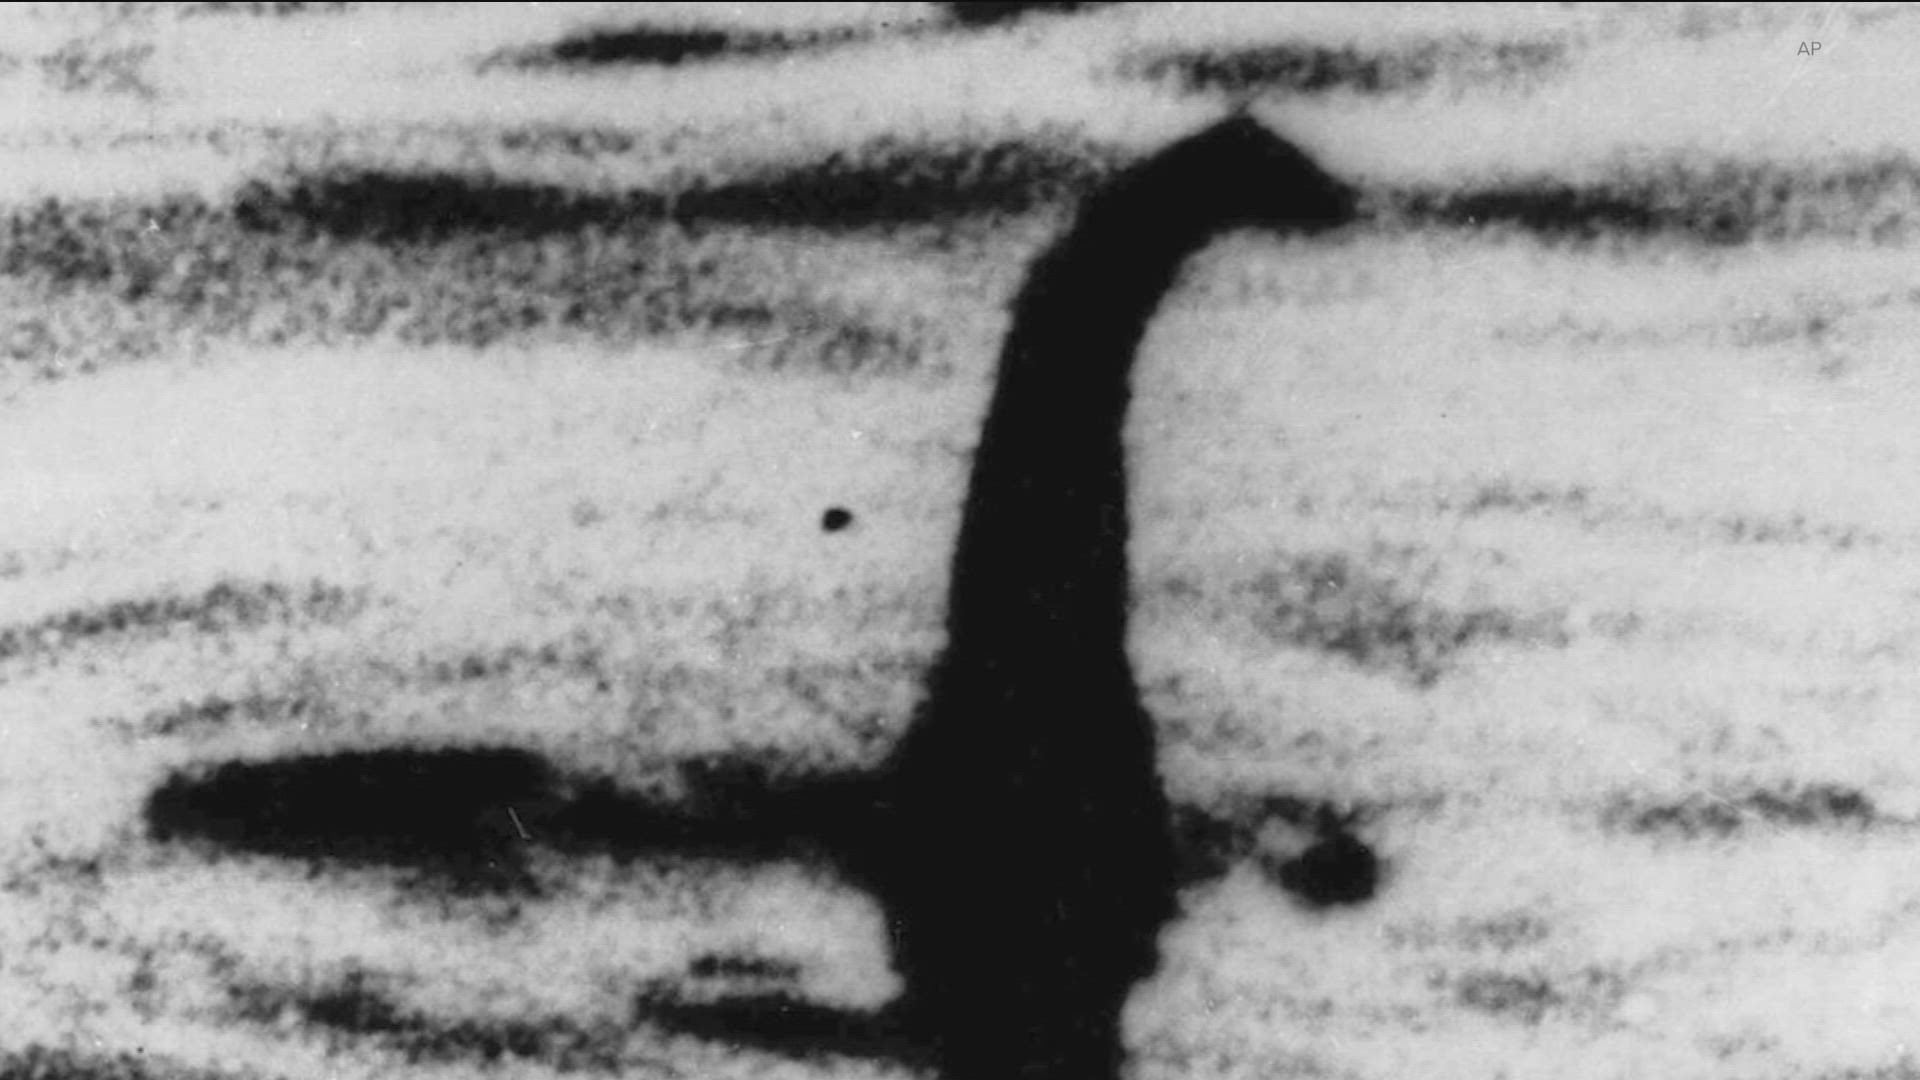 Headlines said scientists called Nessie of Loch Ness “plausible” after a fossil discovery, but the monster itself wasn’t what they believed could be real.